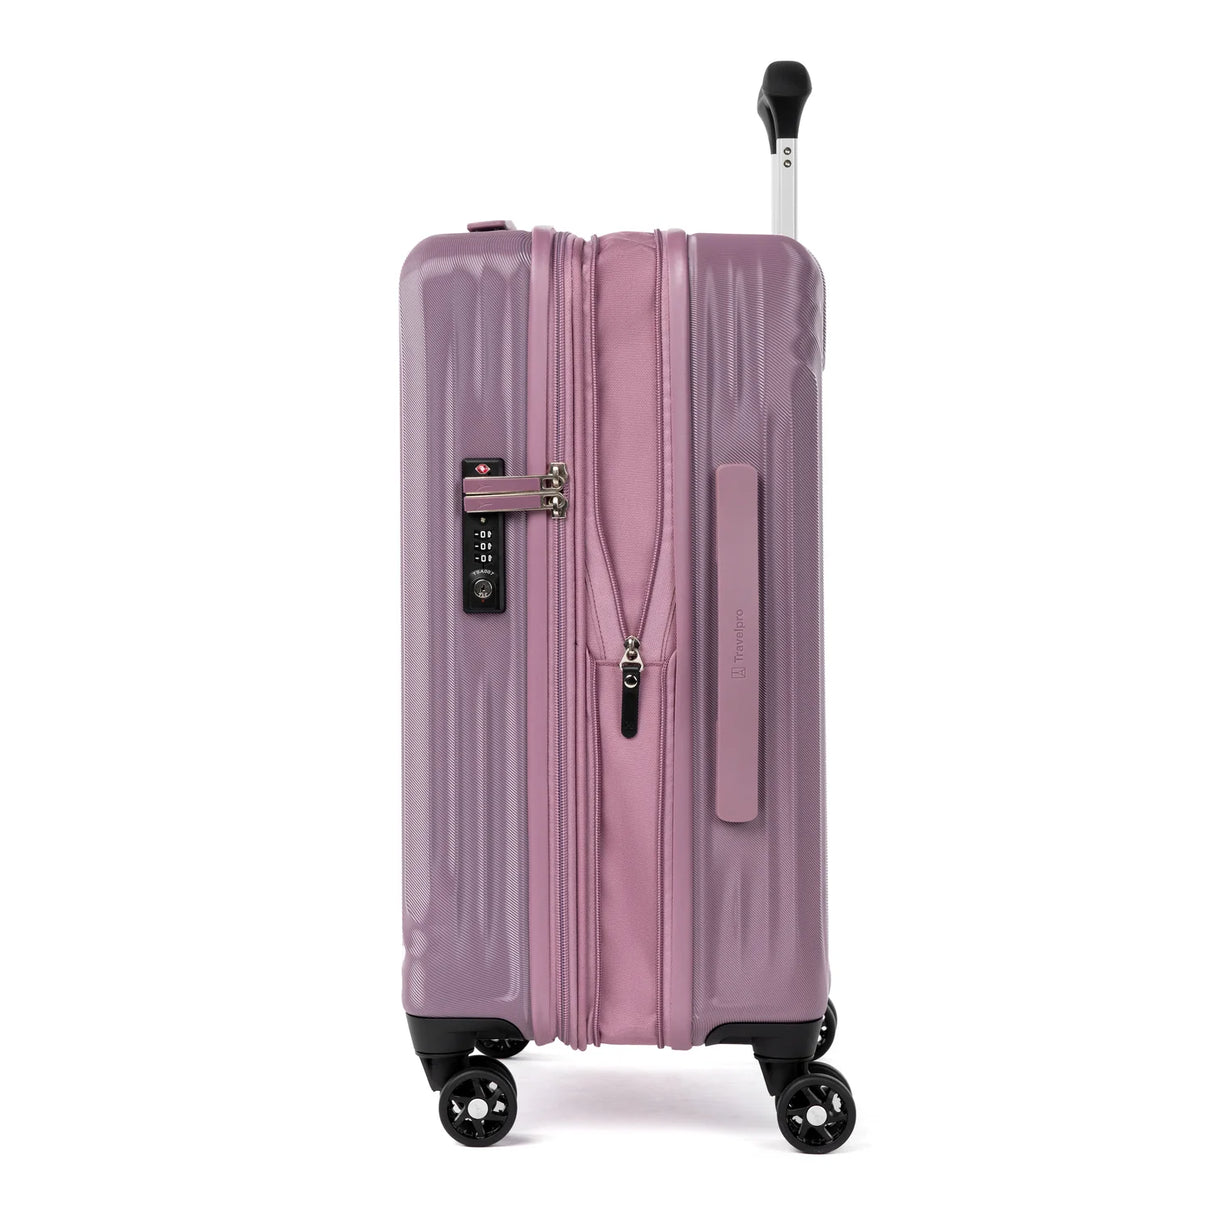 Travelpro Maxlite Air Carry-On Expandable Hardside Spinner , , 401229130_sideexpanded-1500x1500-d707c29_1024x1024_2x_a5e2c54f-0ae5-4def-9472-b32b0d2115a7